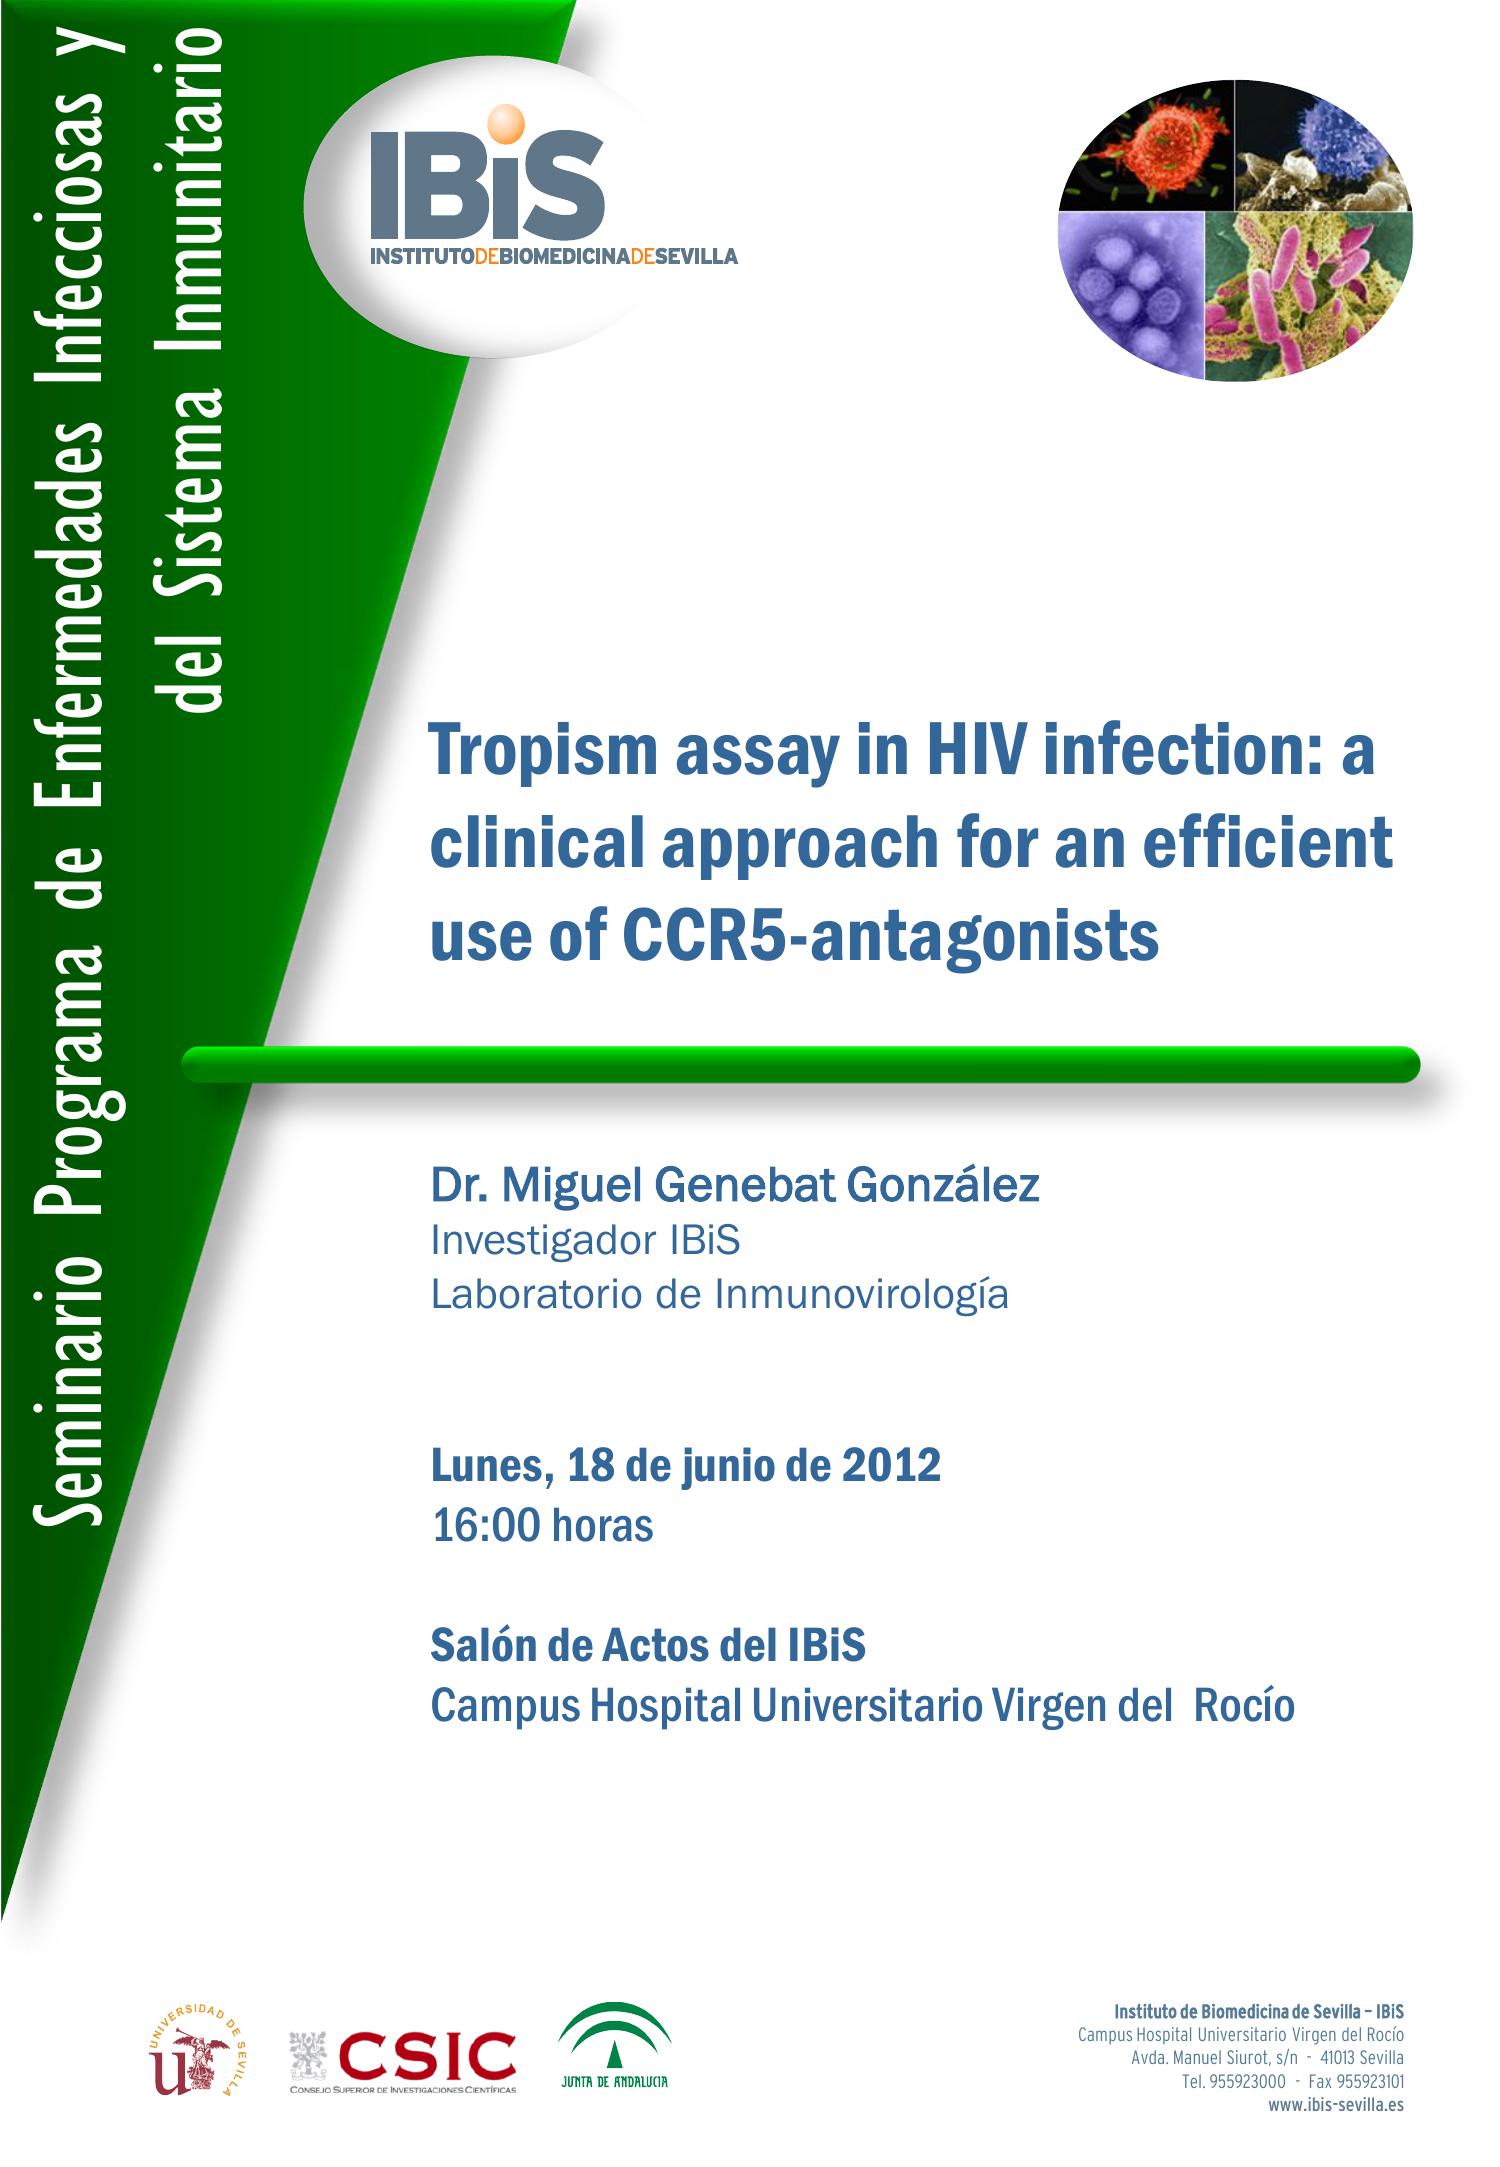 Poster: Tropism assay in HIV infection: a clinical approach for an efficient use of CCR5-antagonists.